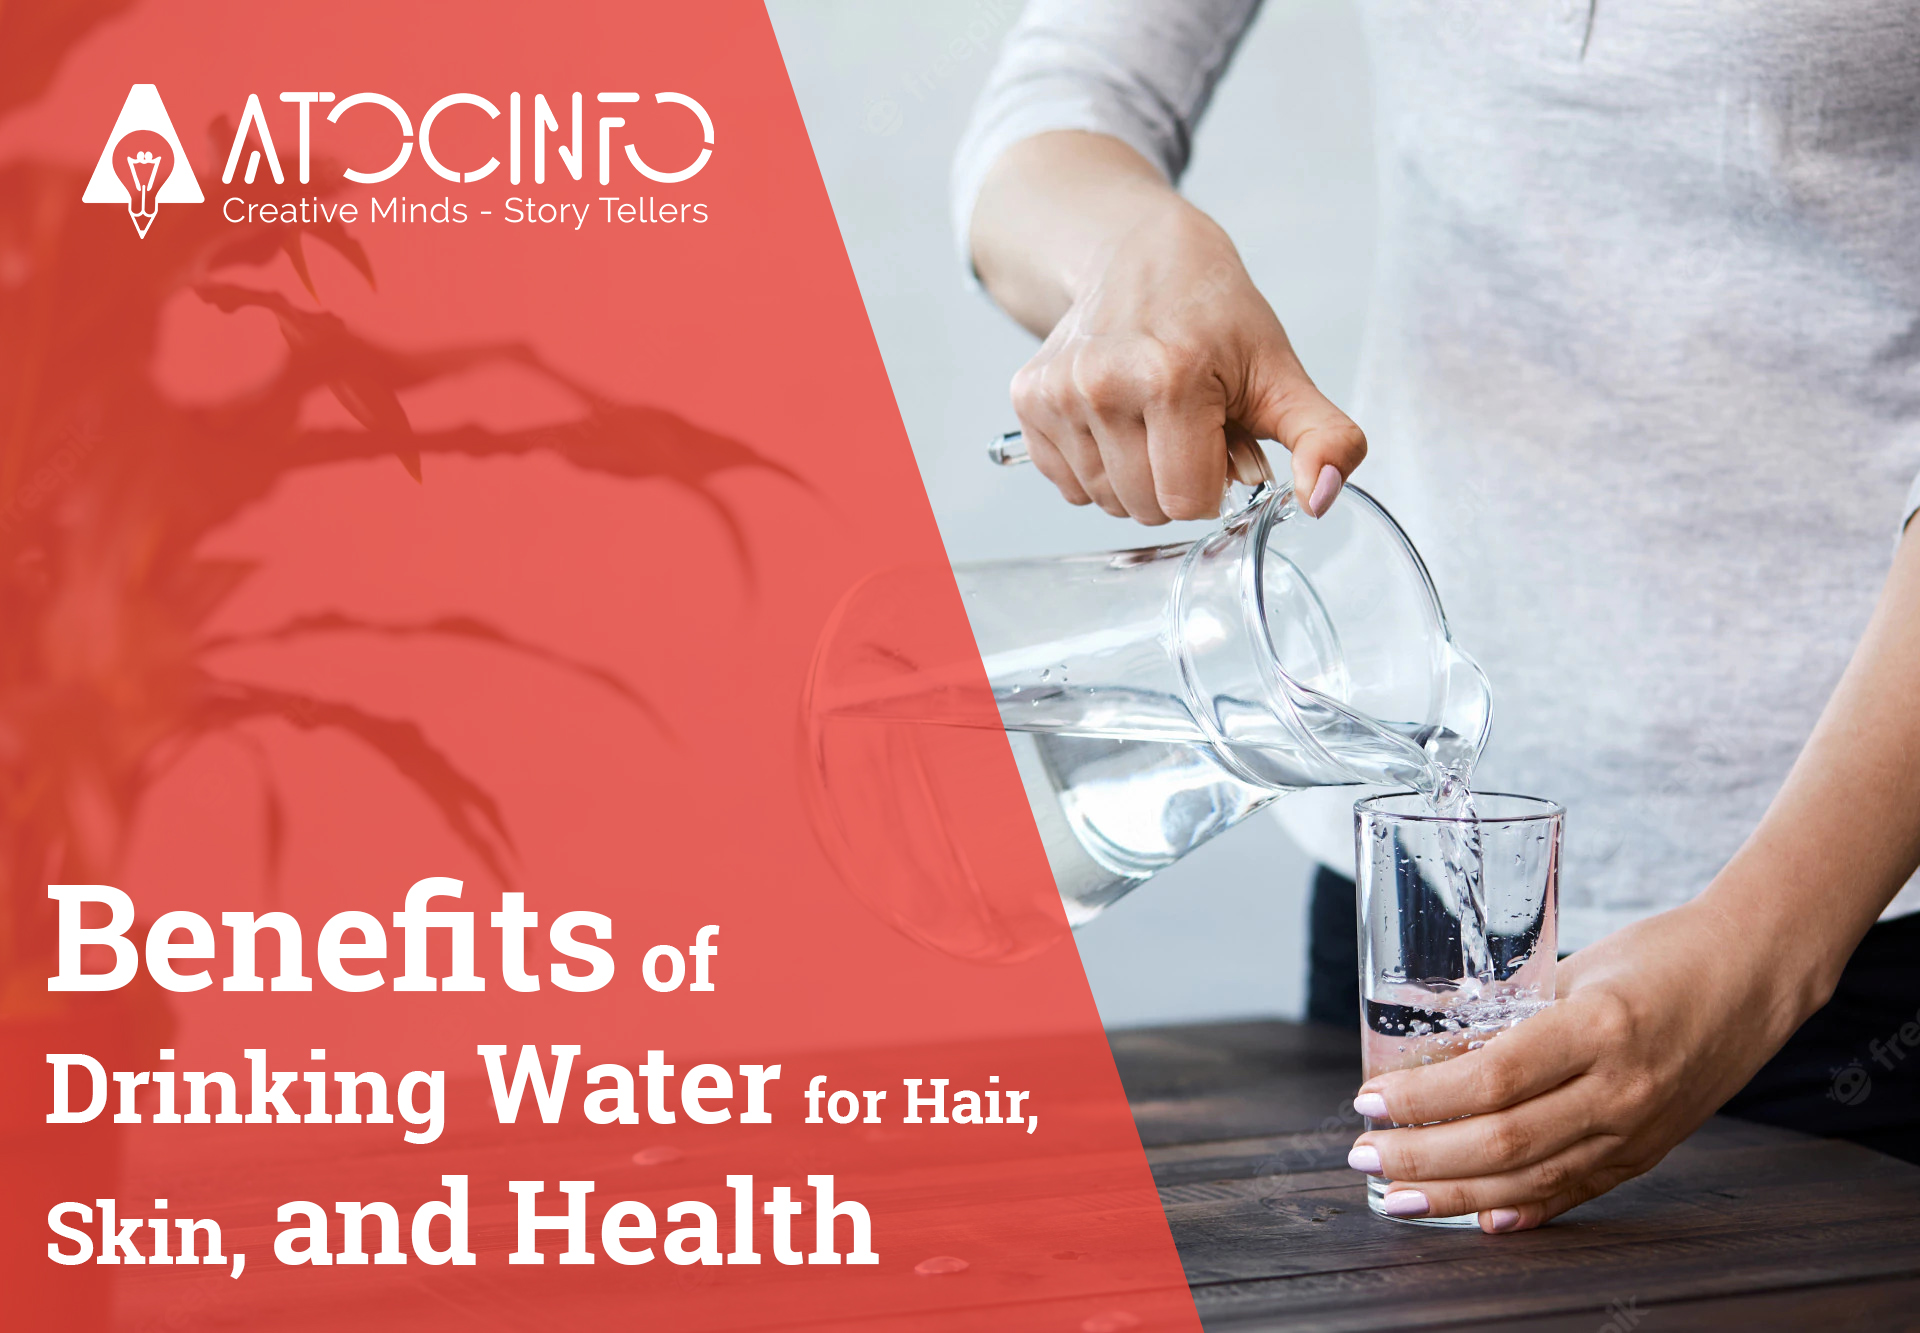 The Benefits of Drinking Water Hair, Skin, and Health